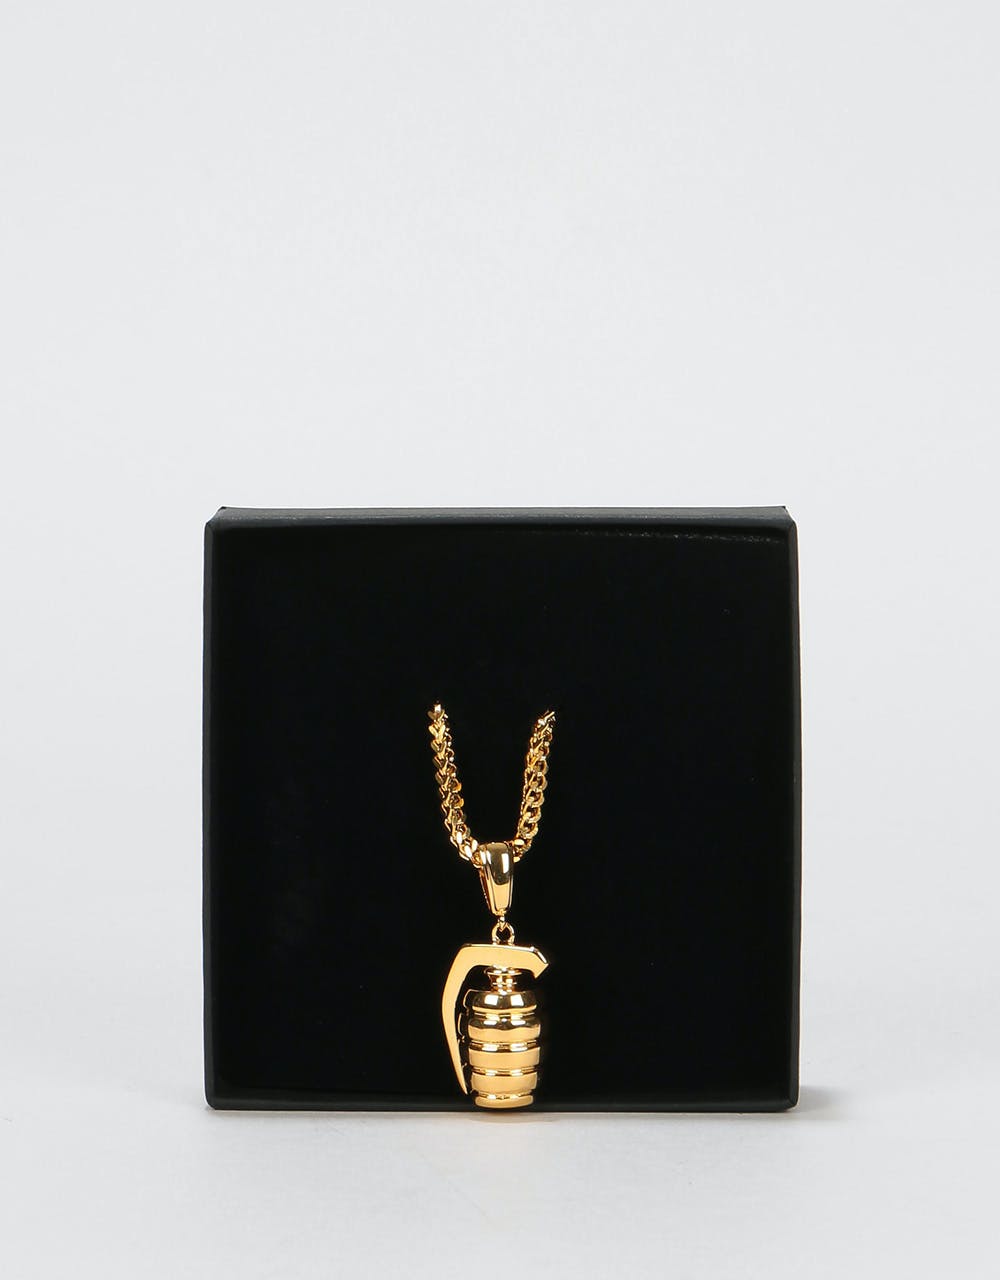 Midvs Co 18K Gold Plated Grenade Necklace - Gold